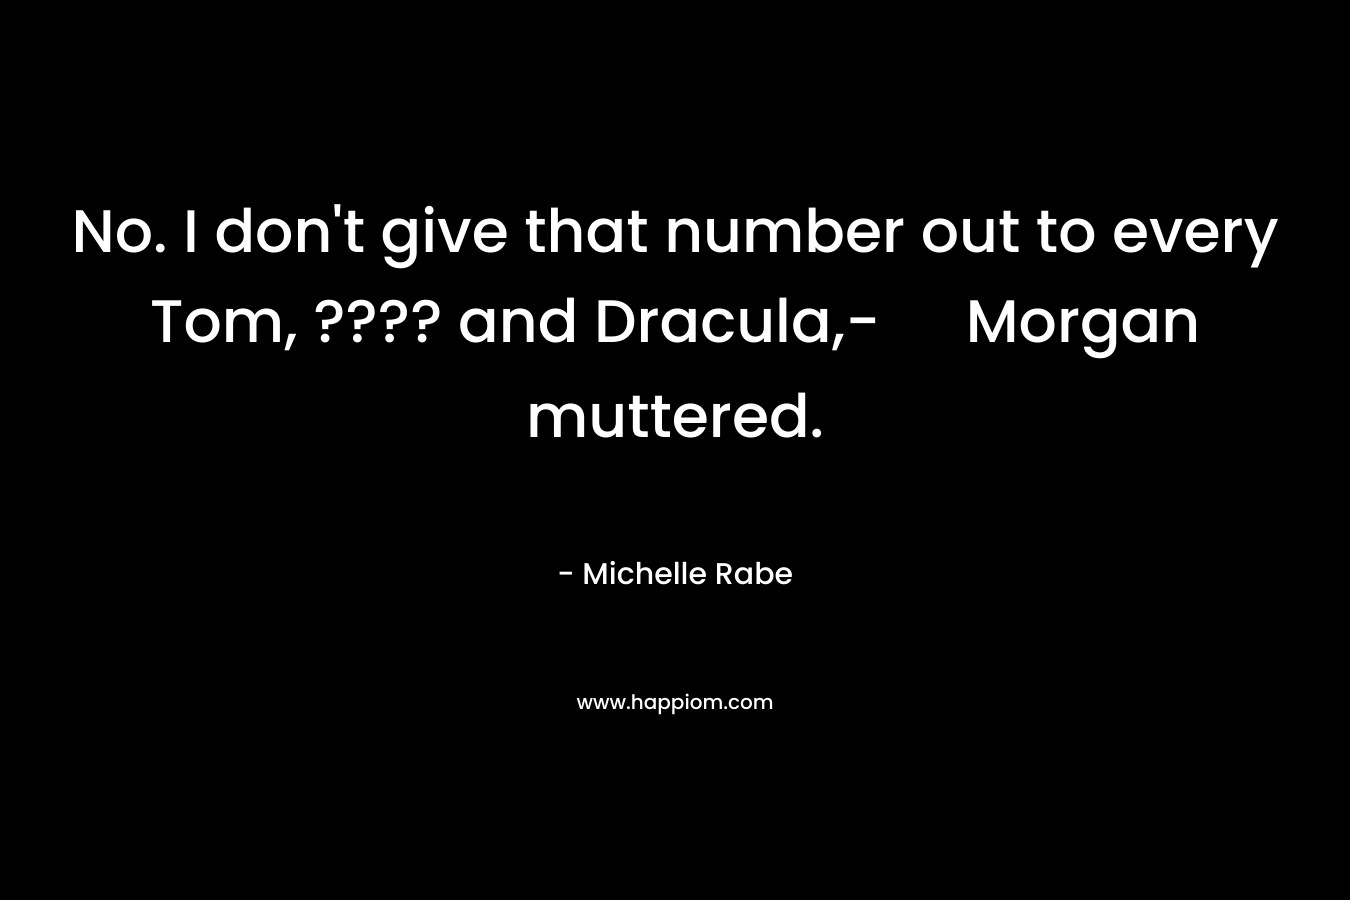 No. I don’t give that number out to every Tom, ???? and Dracula,- Morgan muttered. – Michelle Rabe